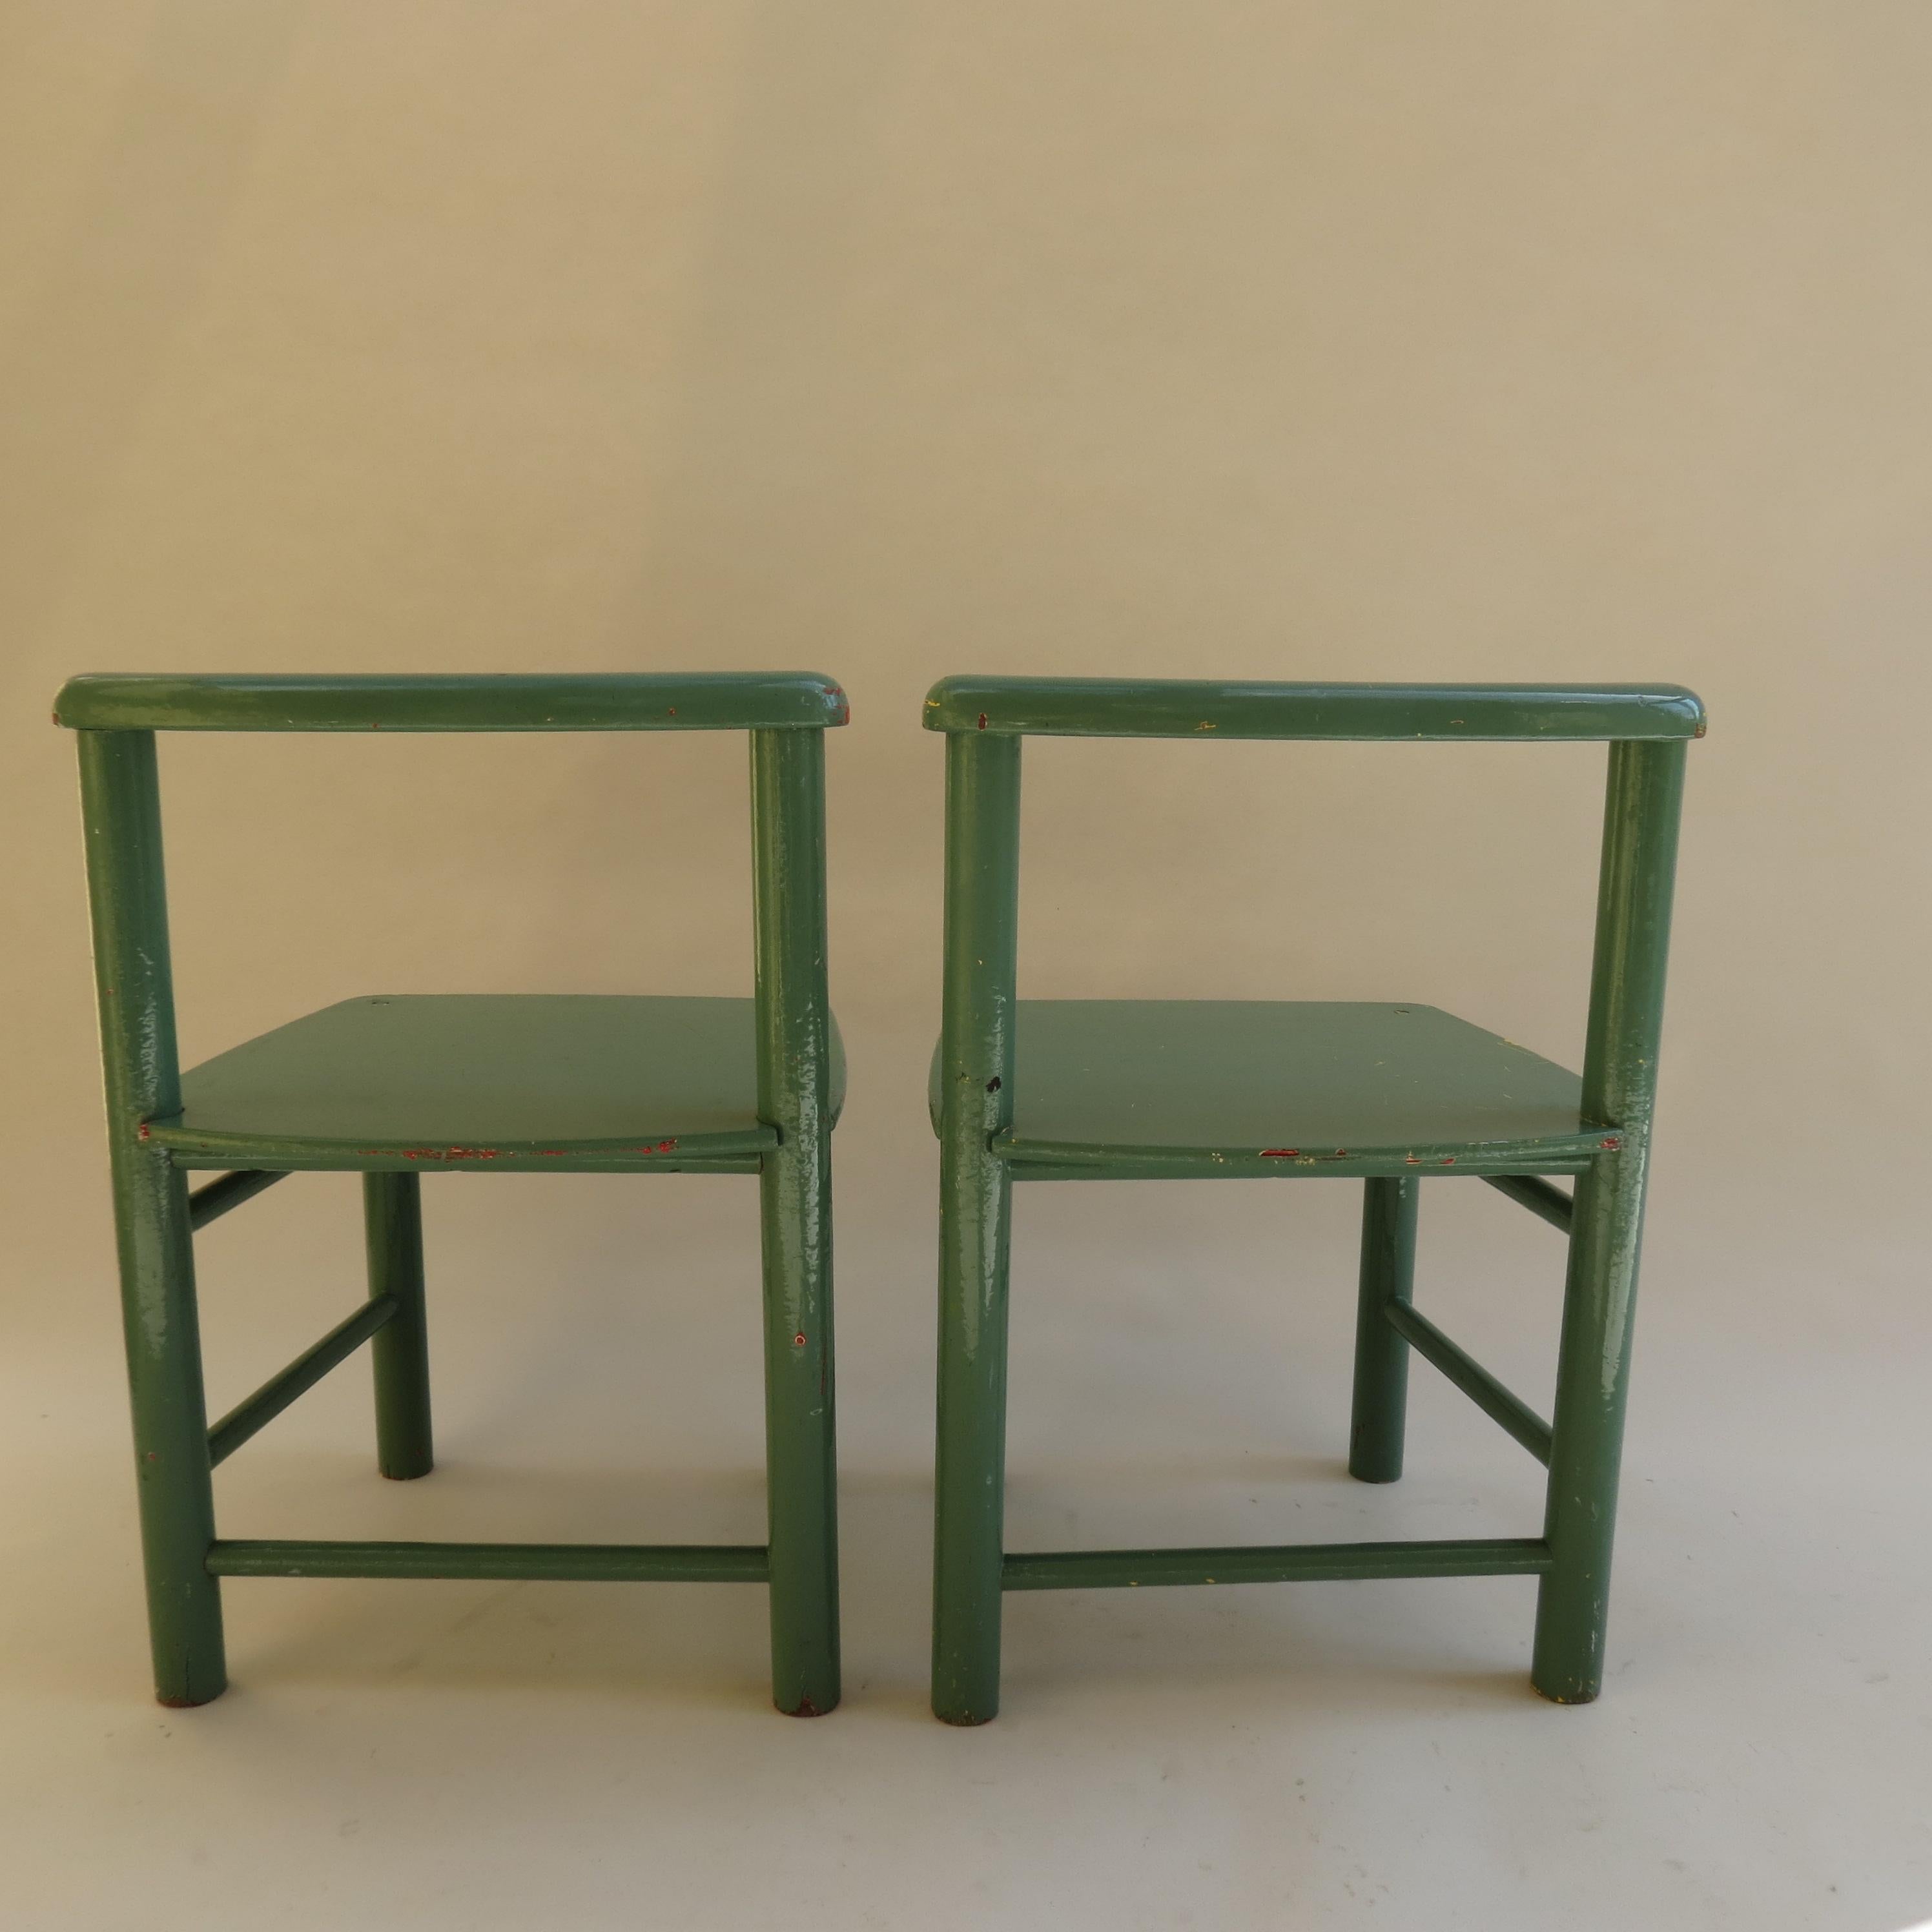 Pine Pair of Scandinavian Childs Chairs in Green from the 1960s